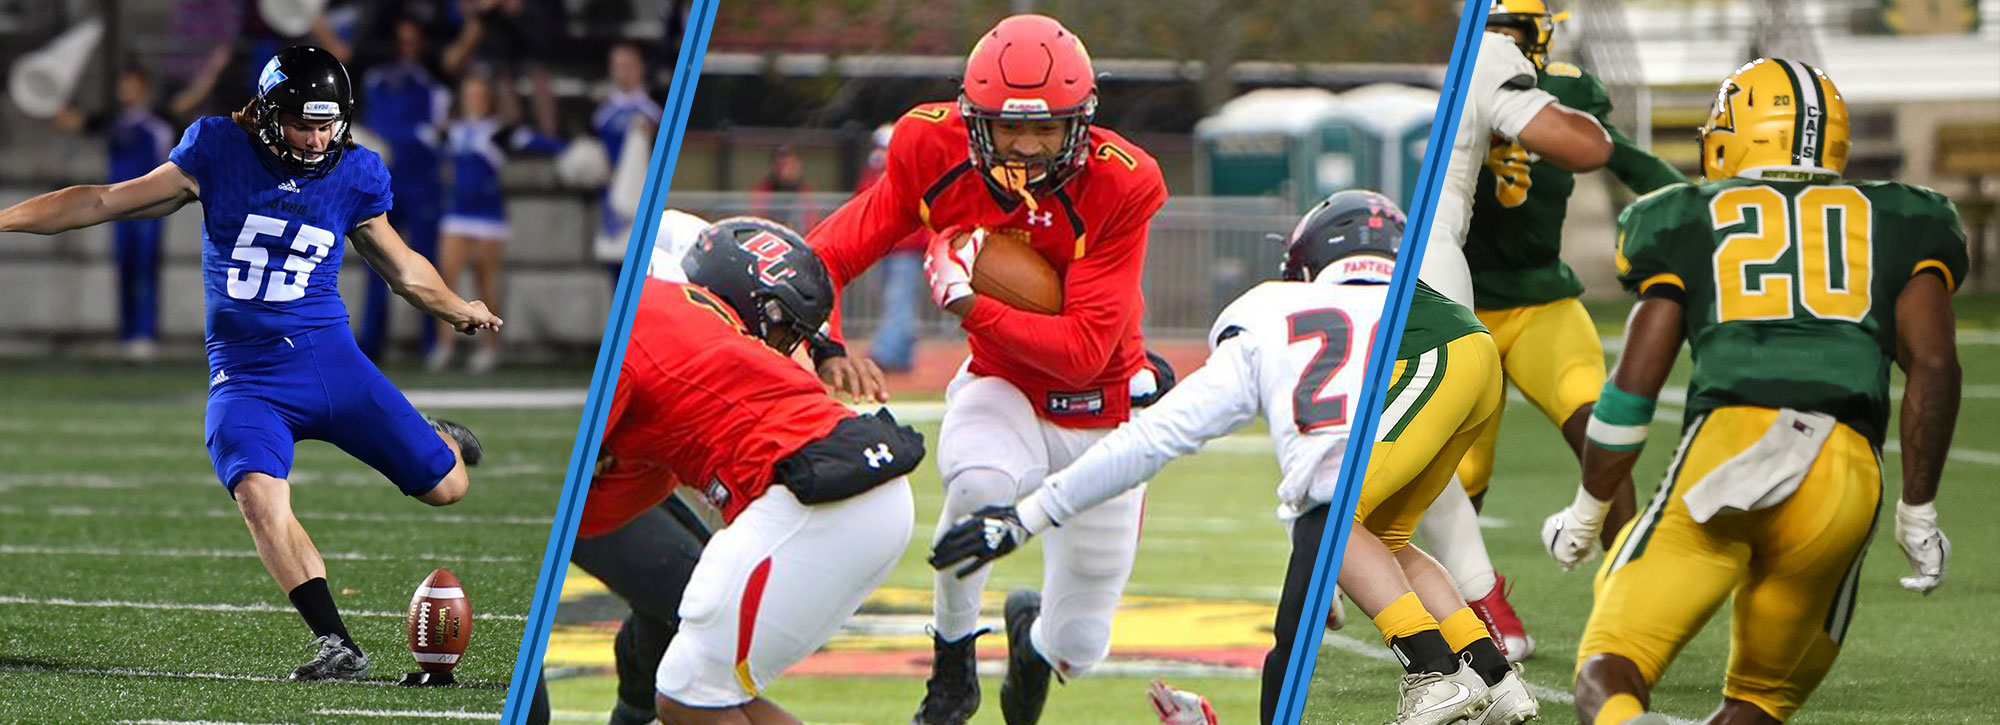 Ferris State's Campbell, Northern Michigan's Ladd & Grand Valley State's McGrath Named GLIAC Football Players of the Week